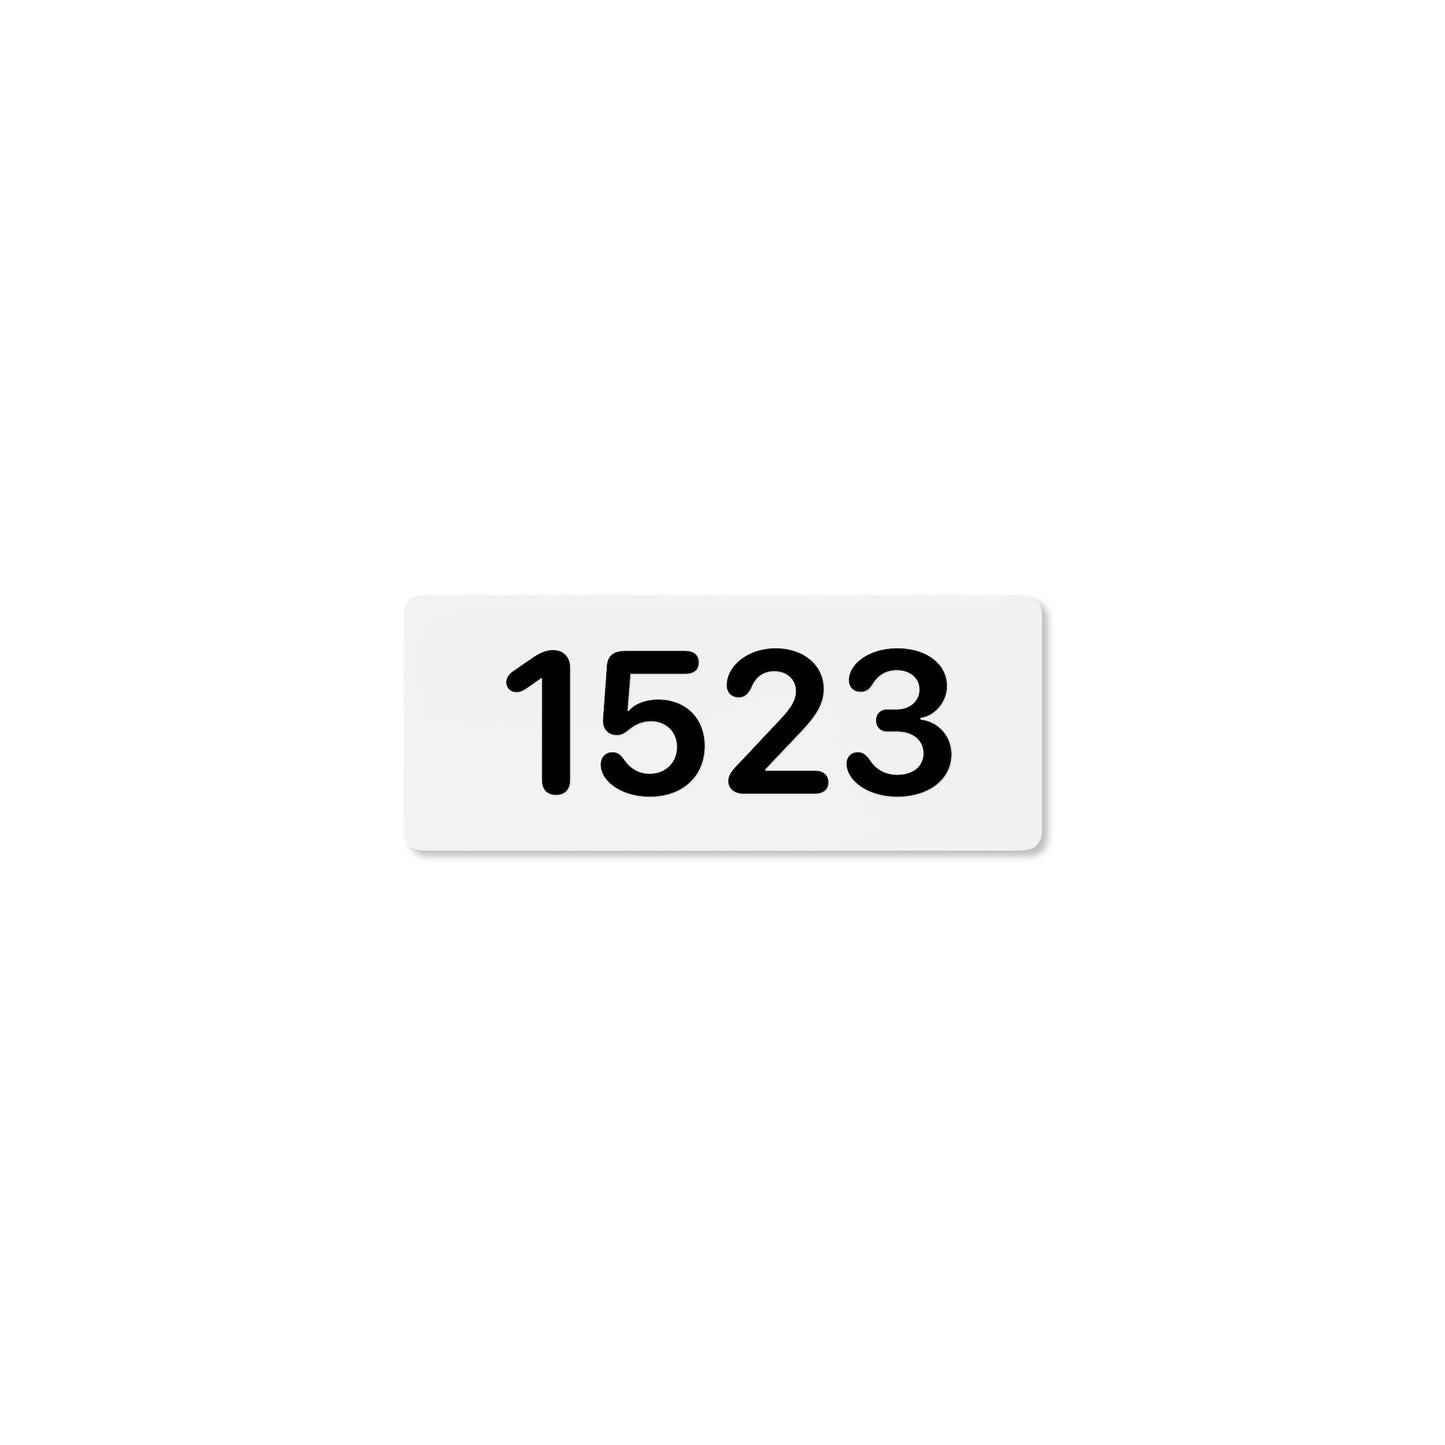 Numeral 1523